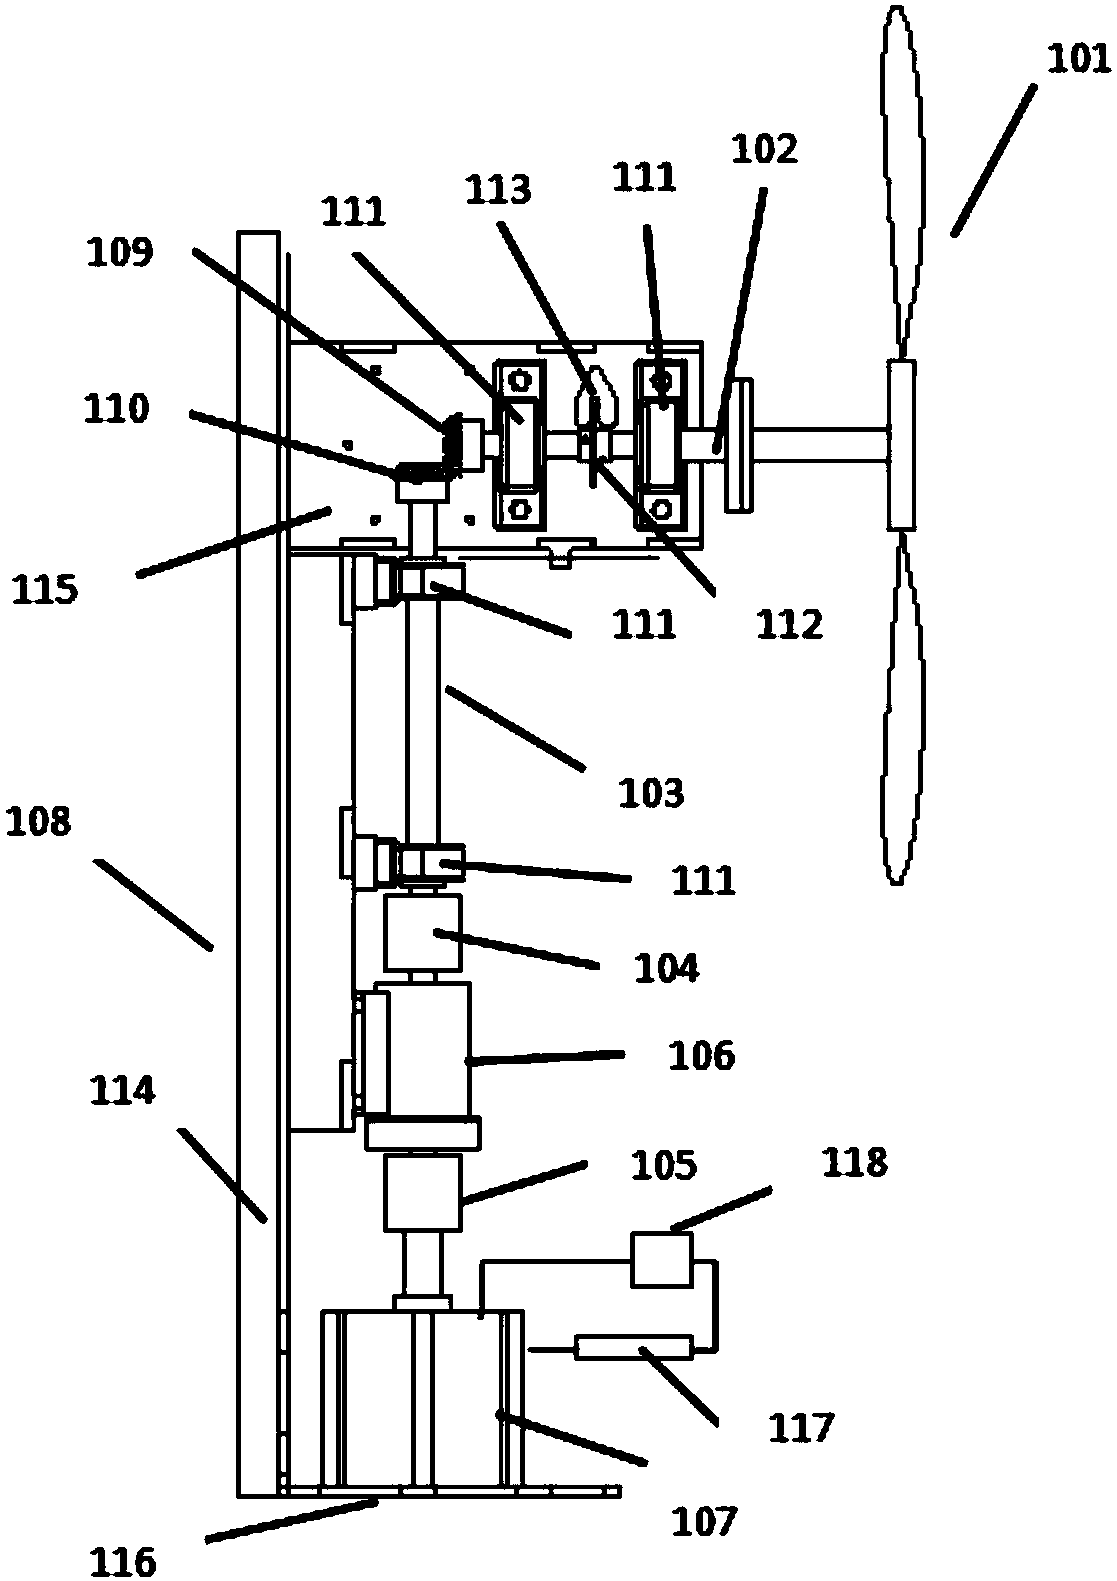 Wind driven generator test device and method